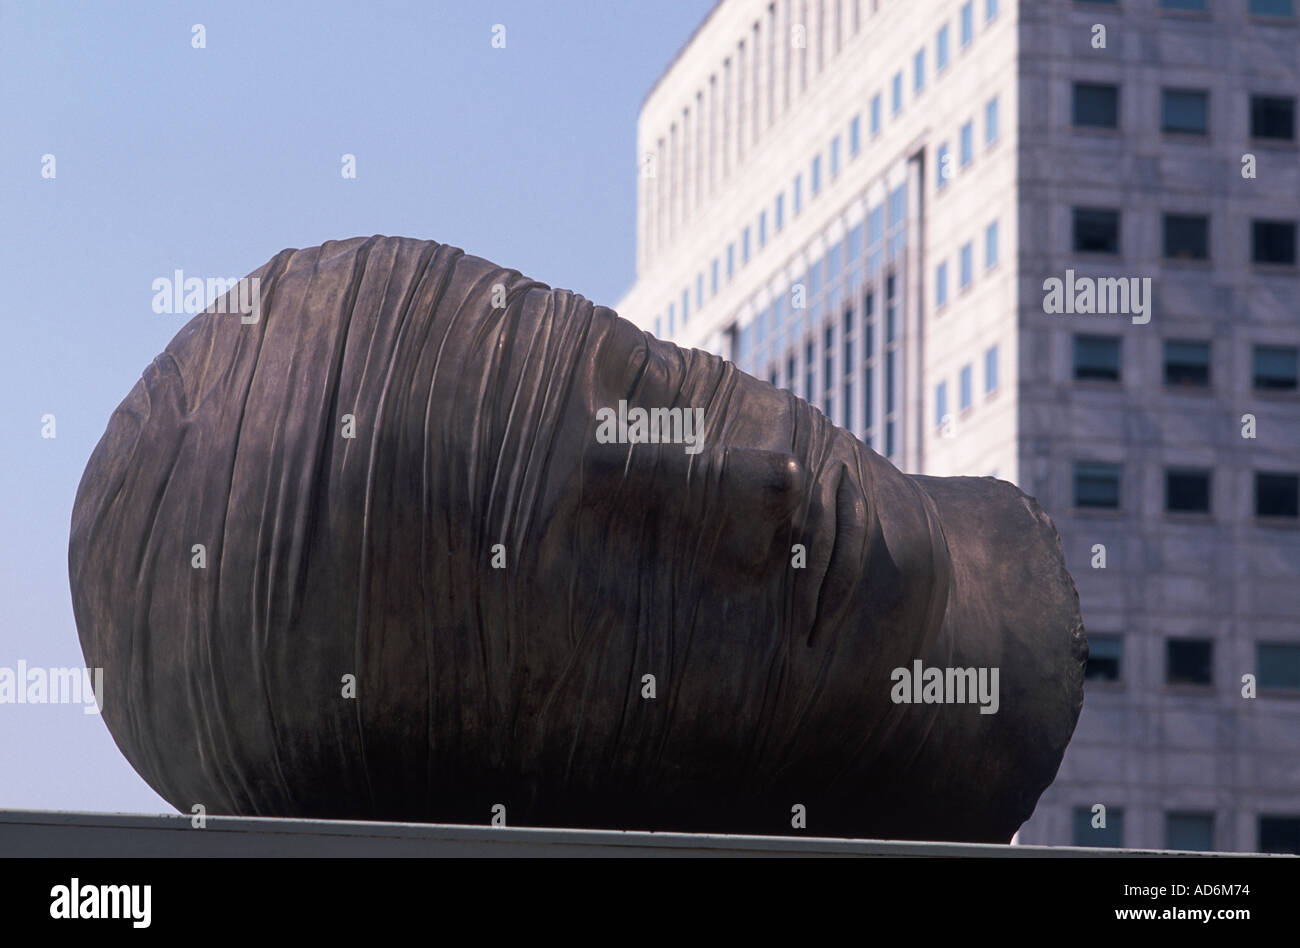 Large reclining head in open public space at Canary Wharf, London Docklands. Sculpture is by Igor Mitoraj. Stock Photo